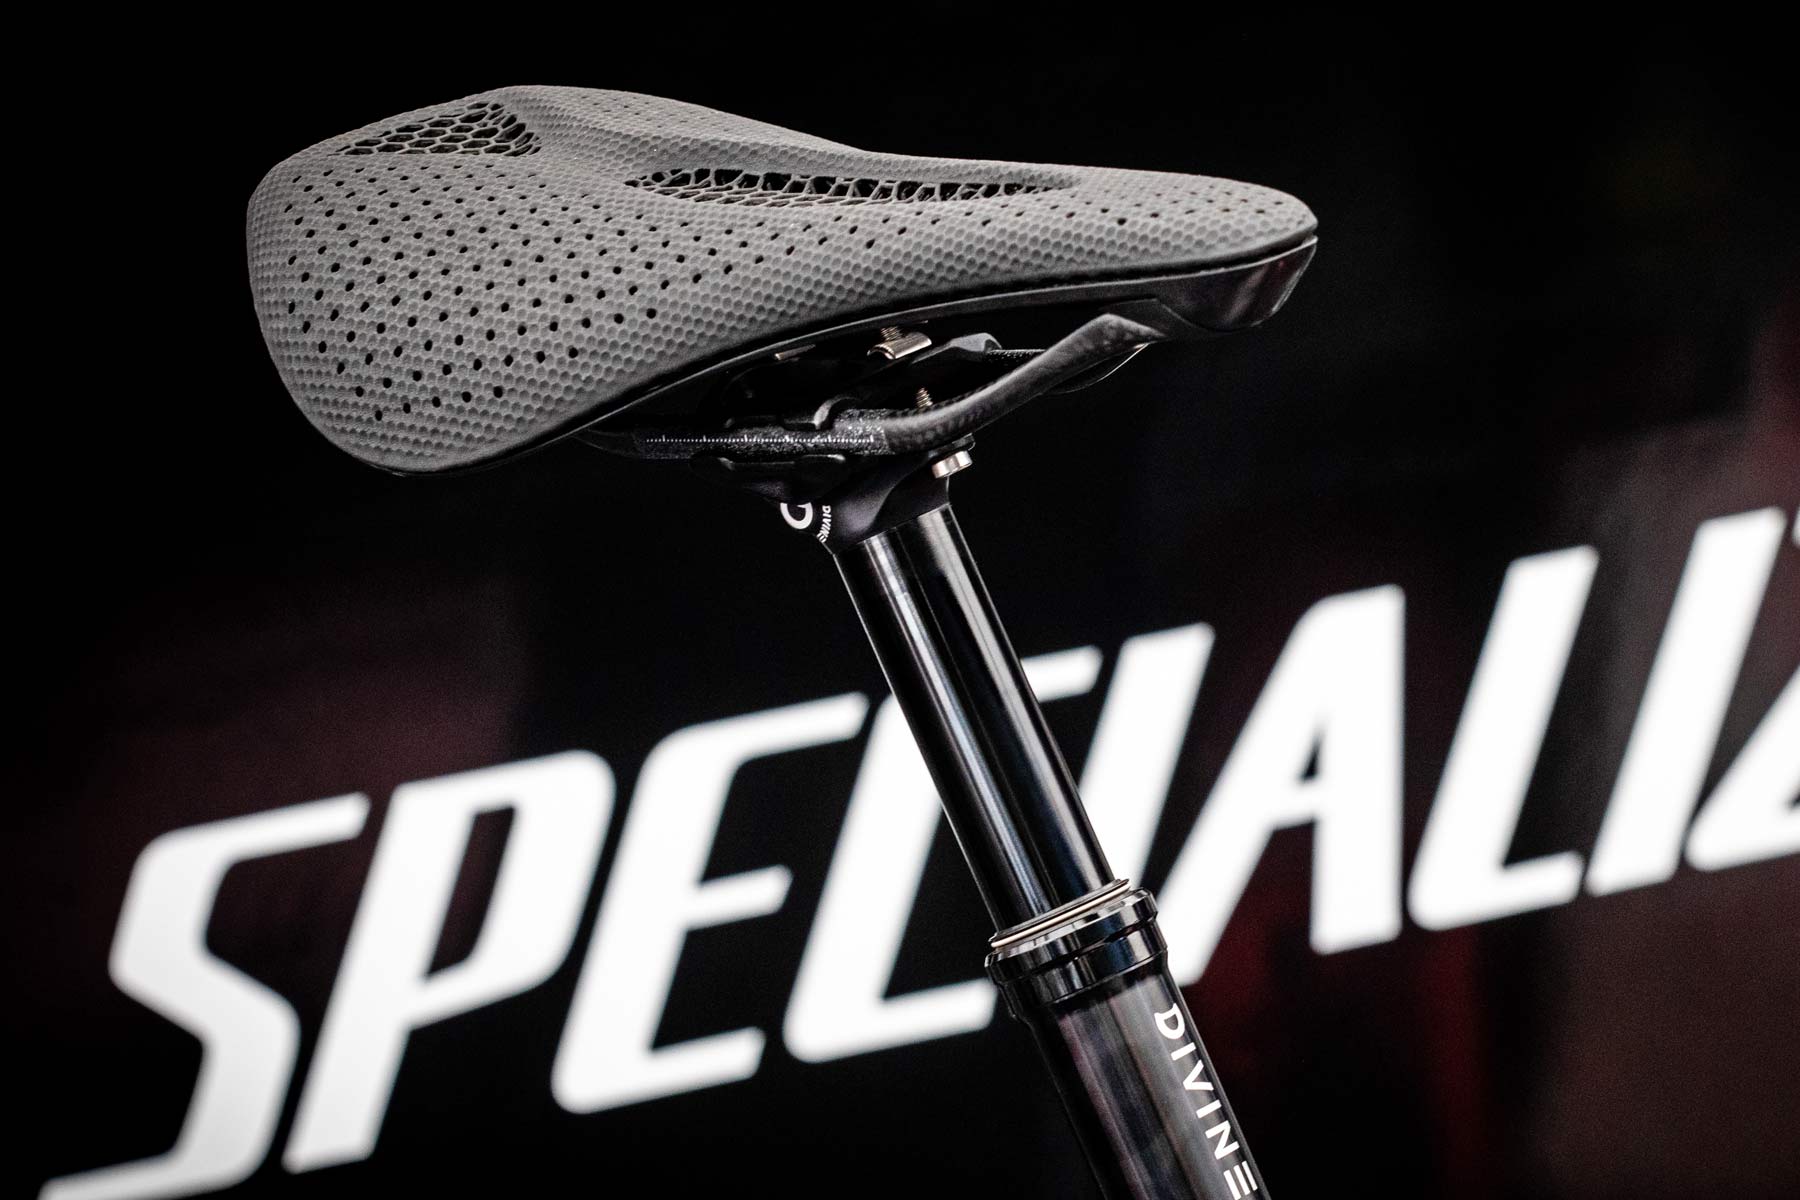 2019 Specialized S-Works Power Mirror saddle, lightweight padded 3D printed road XC MTB saddle, photo by Michal Cerveny